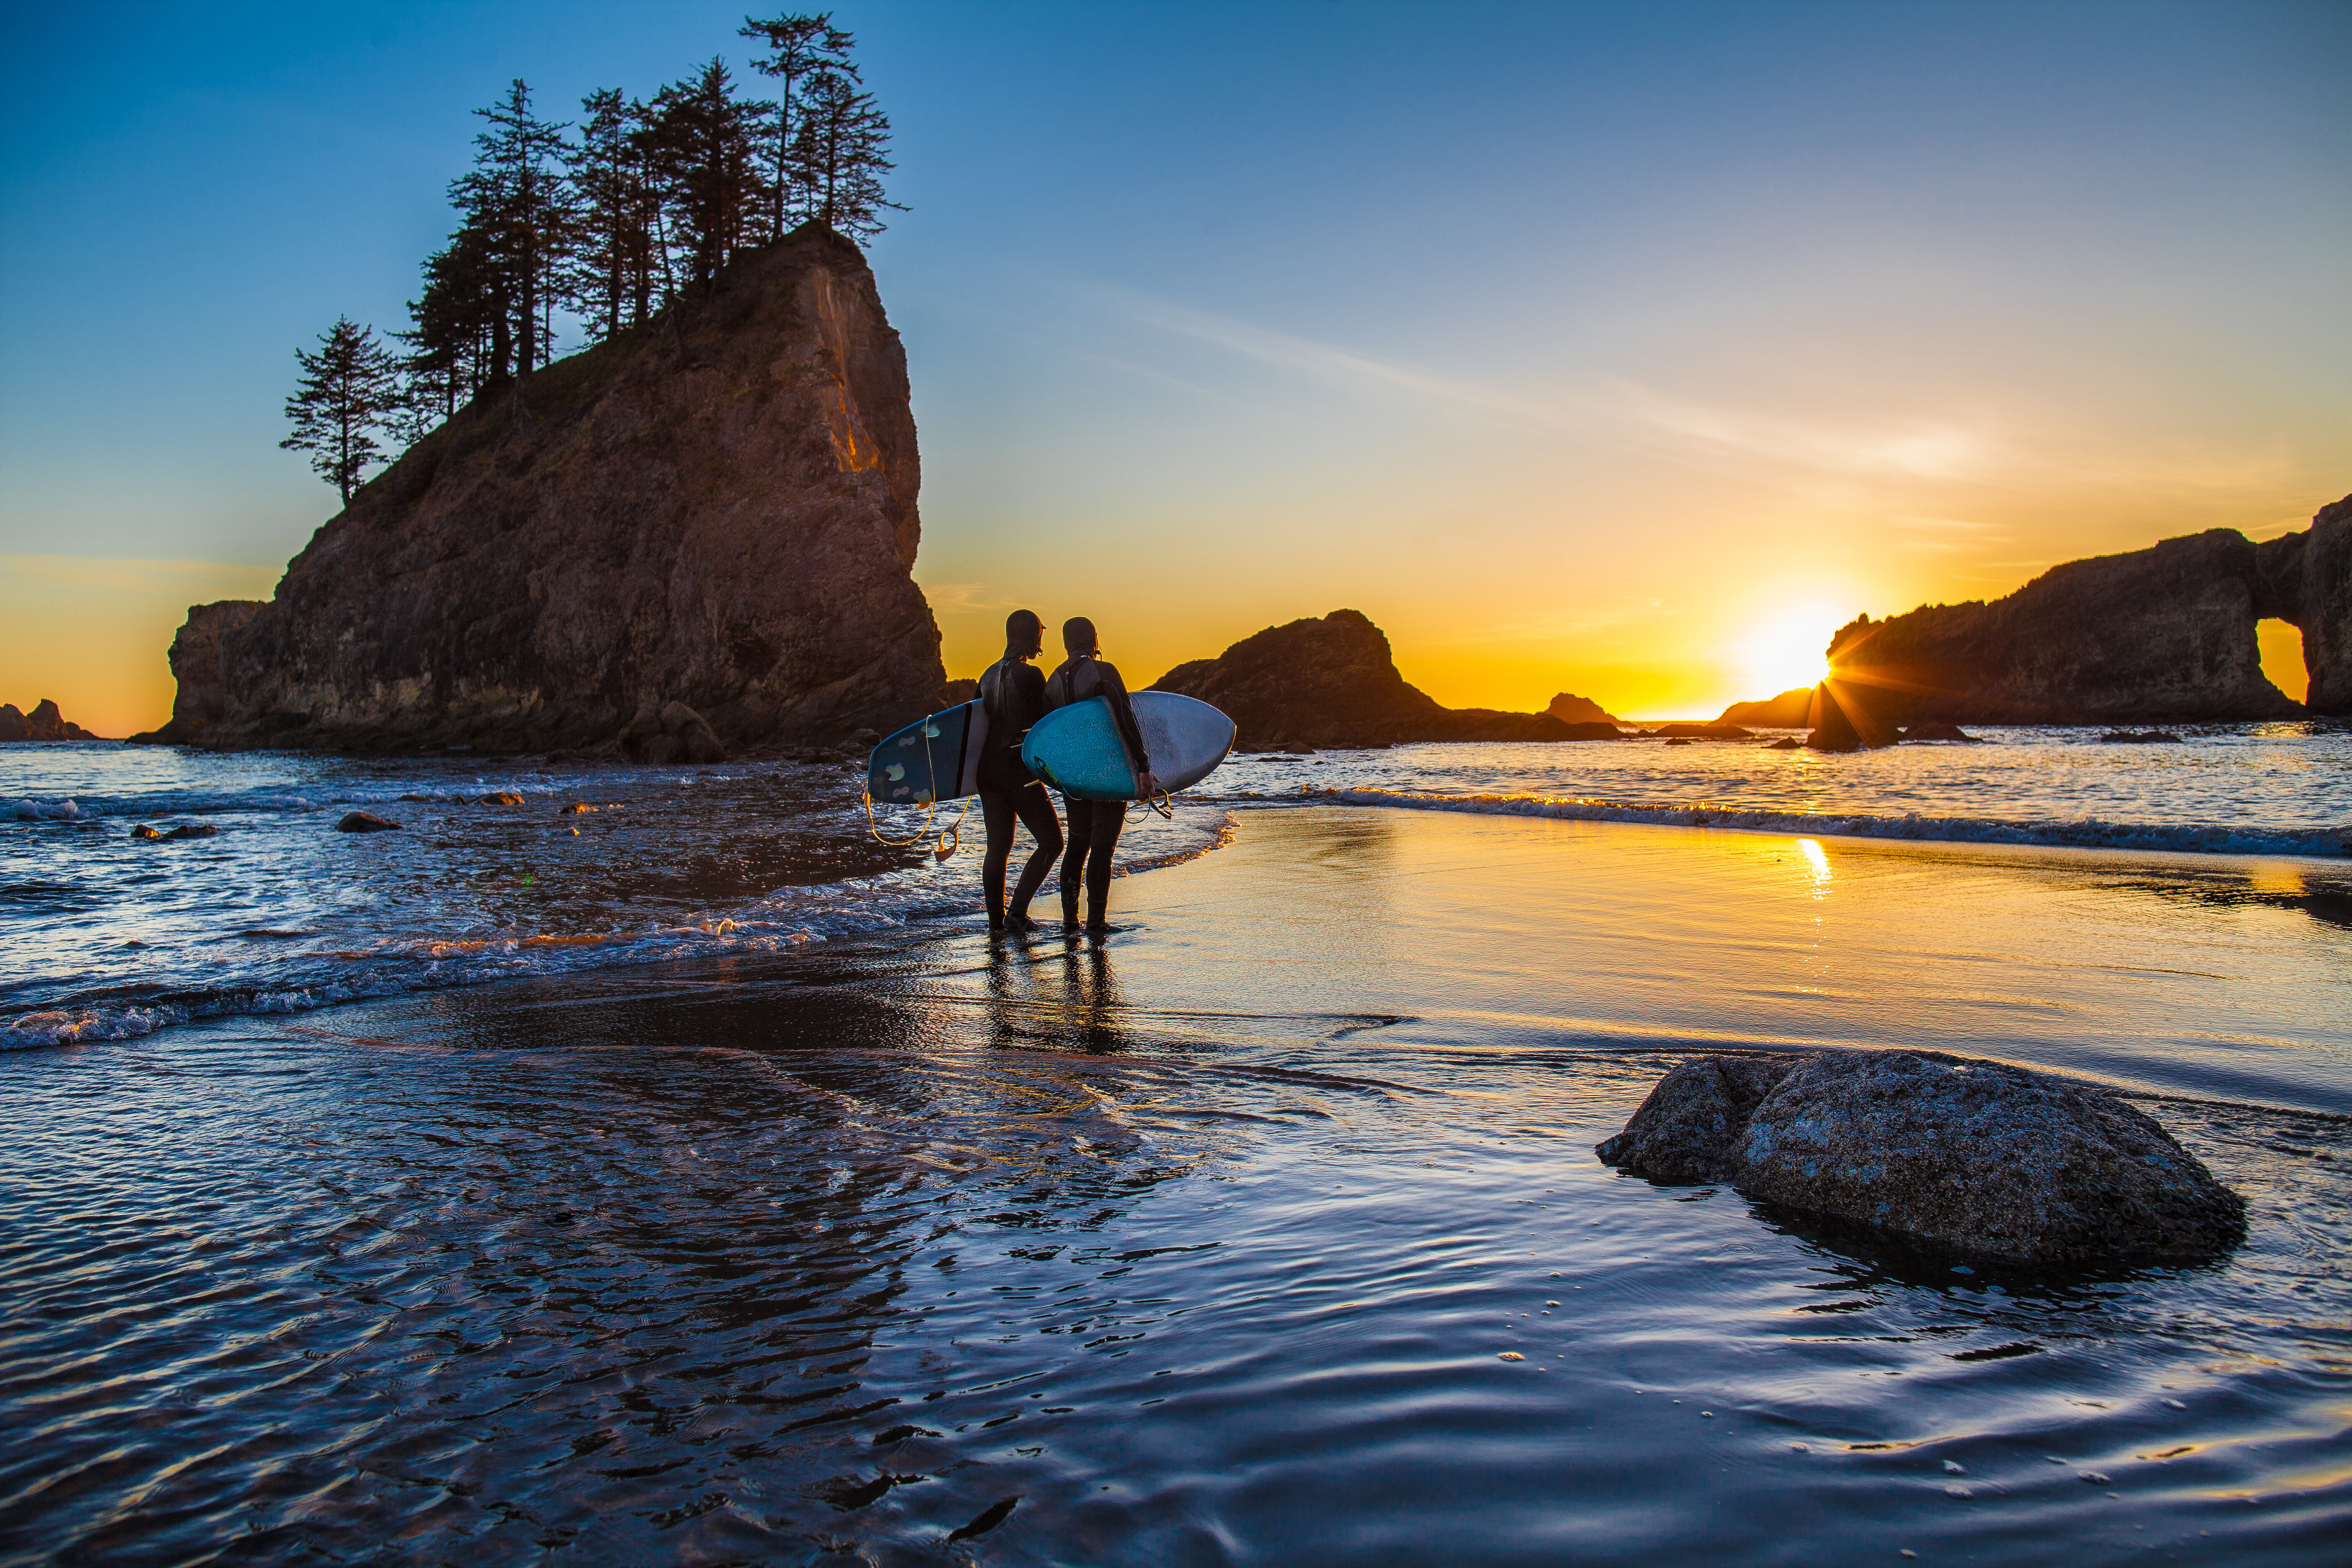 A pair of surfers walk on the shore during sunset in Olympic Coast National Marine Sanctuary